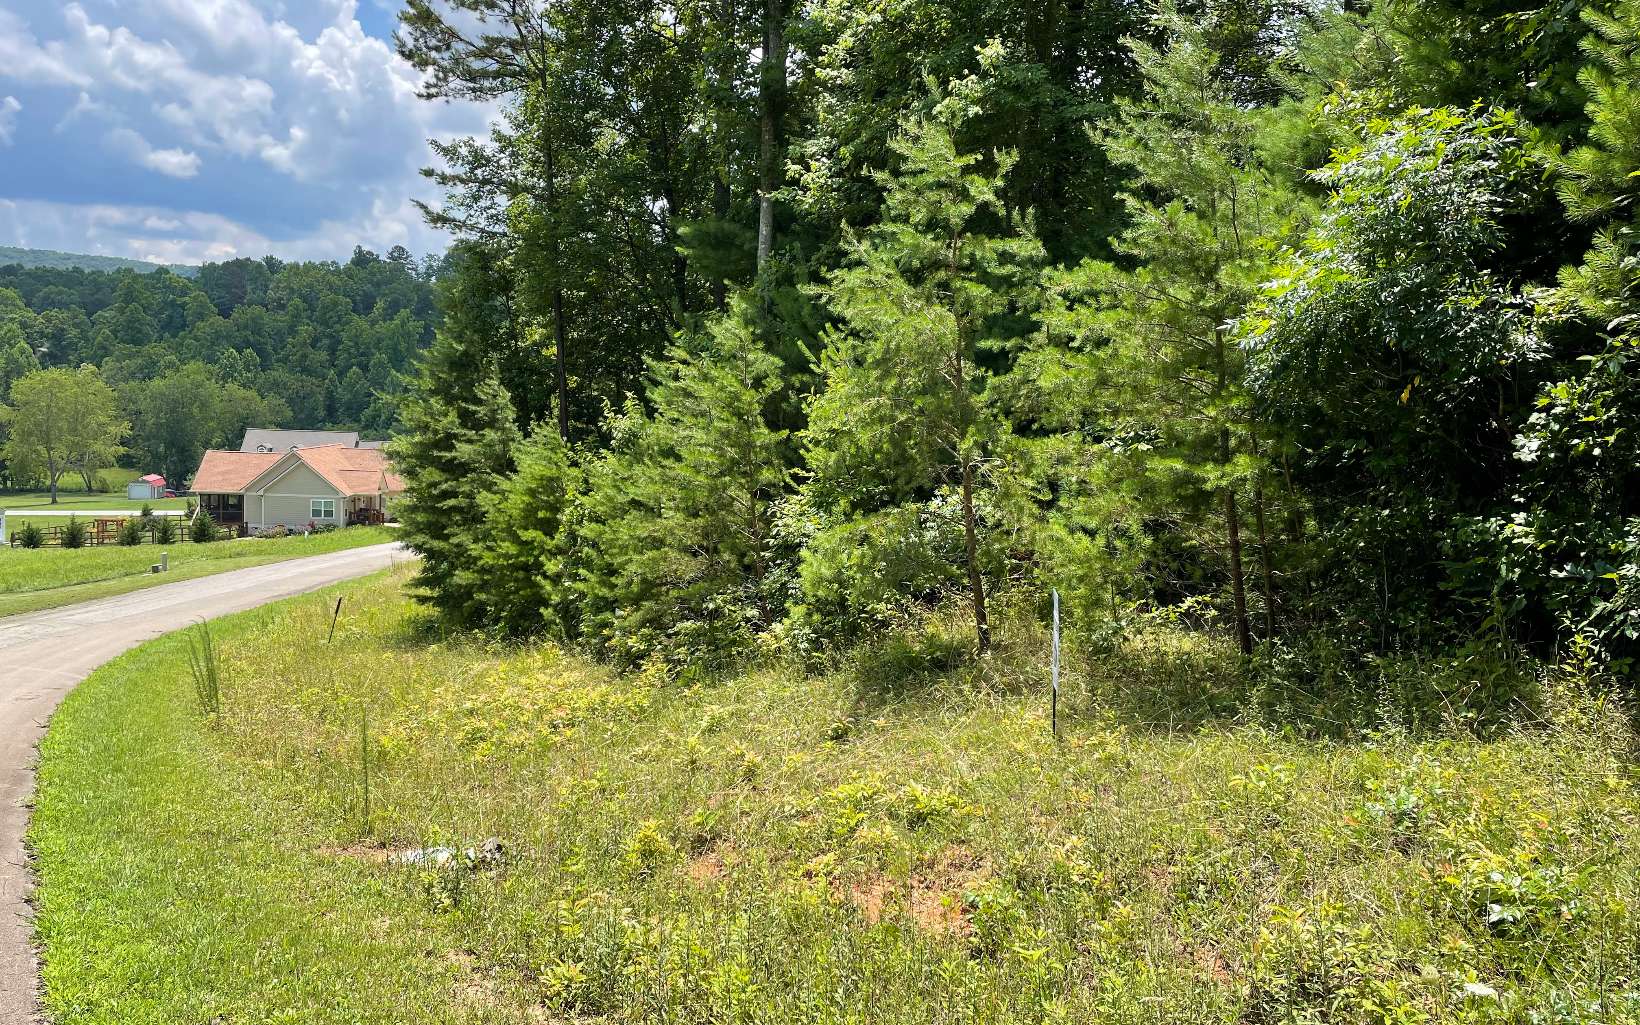 Nice level lot in a beautiful neighborhood for your home. Not far from town. Plenty of activities to enjoy here in Blairsville, hiking, boating, parks and recreation...come check it out. Level 3 soil report available.